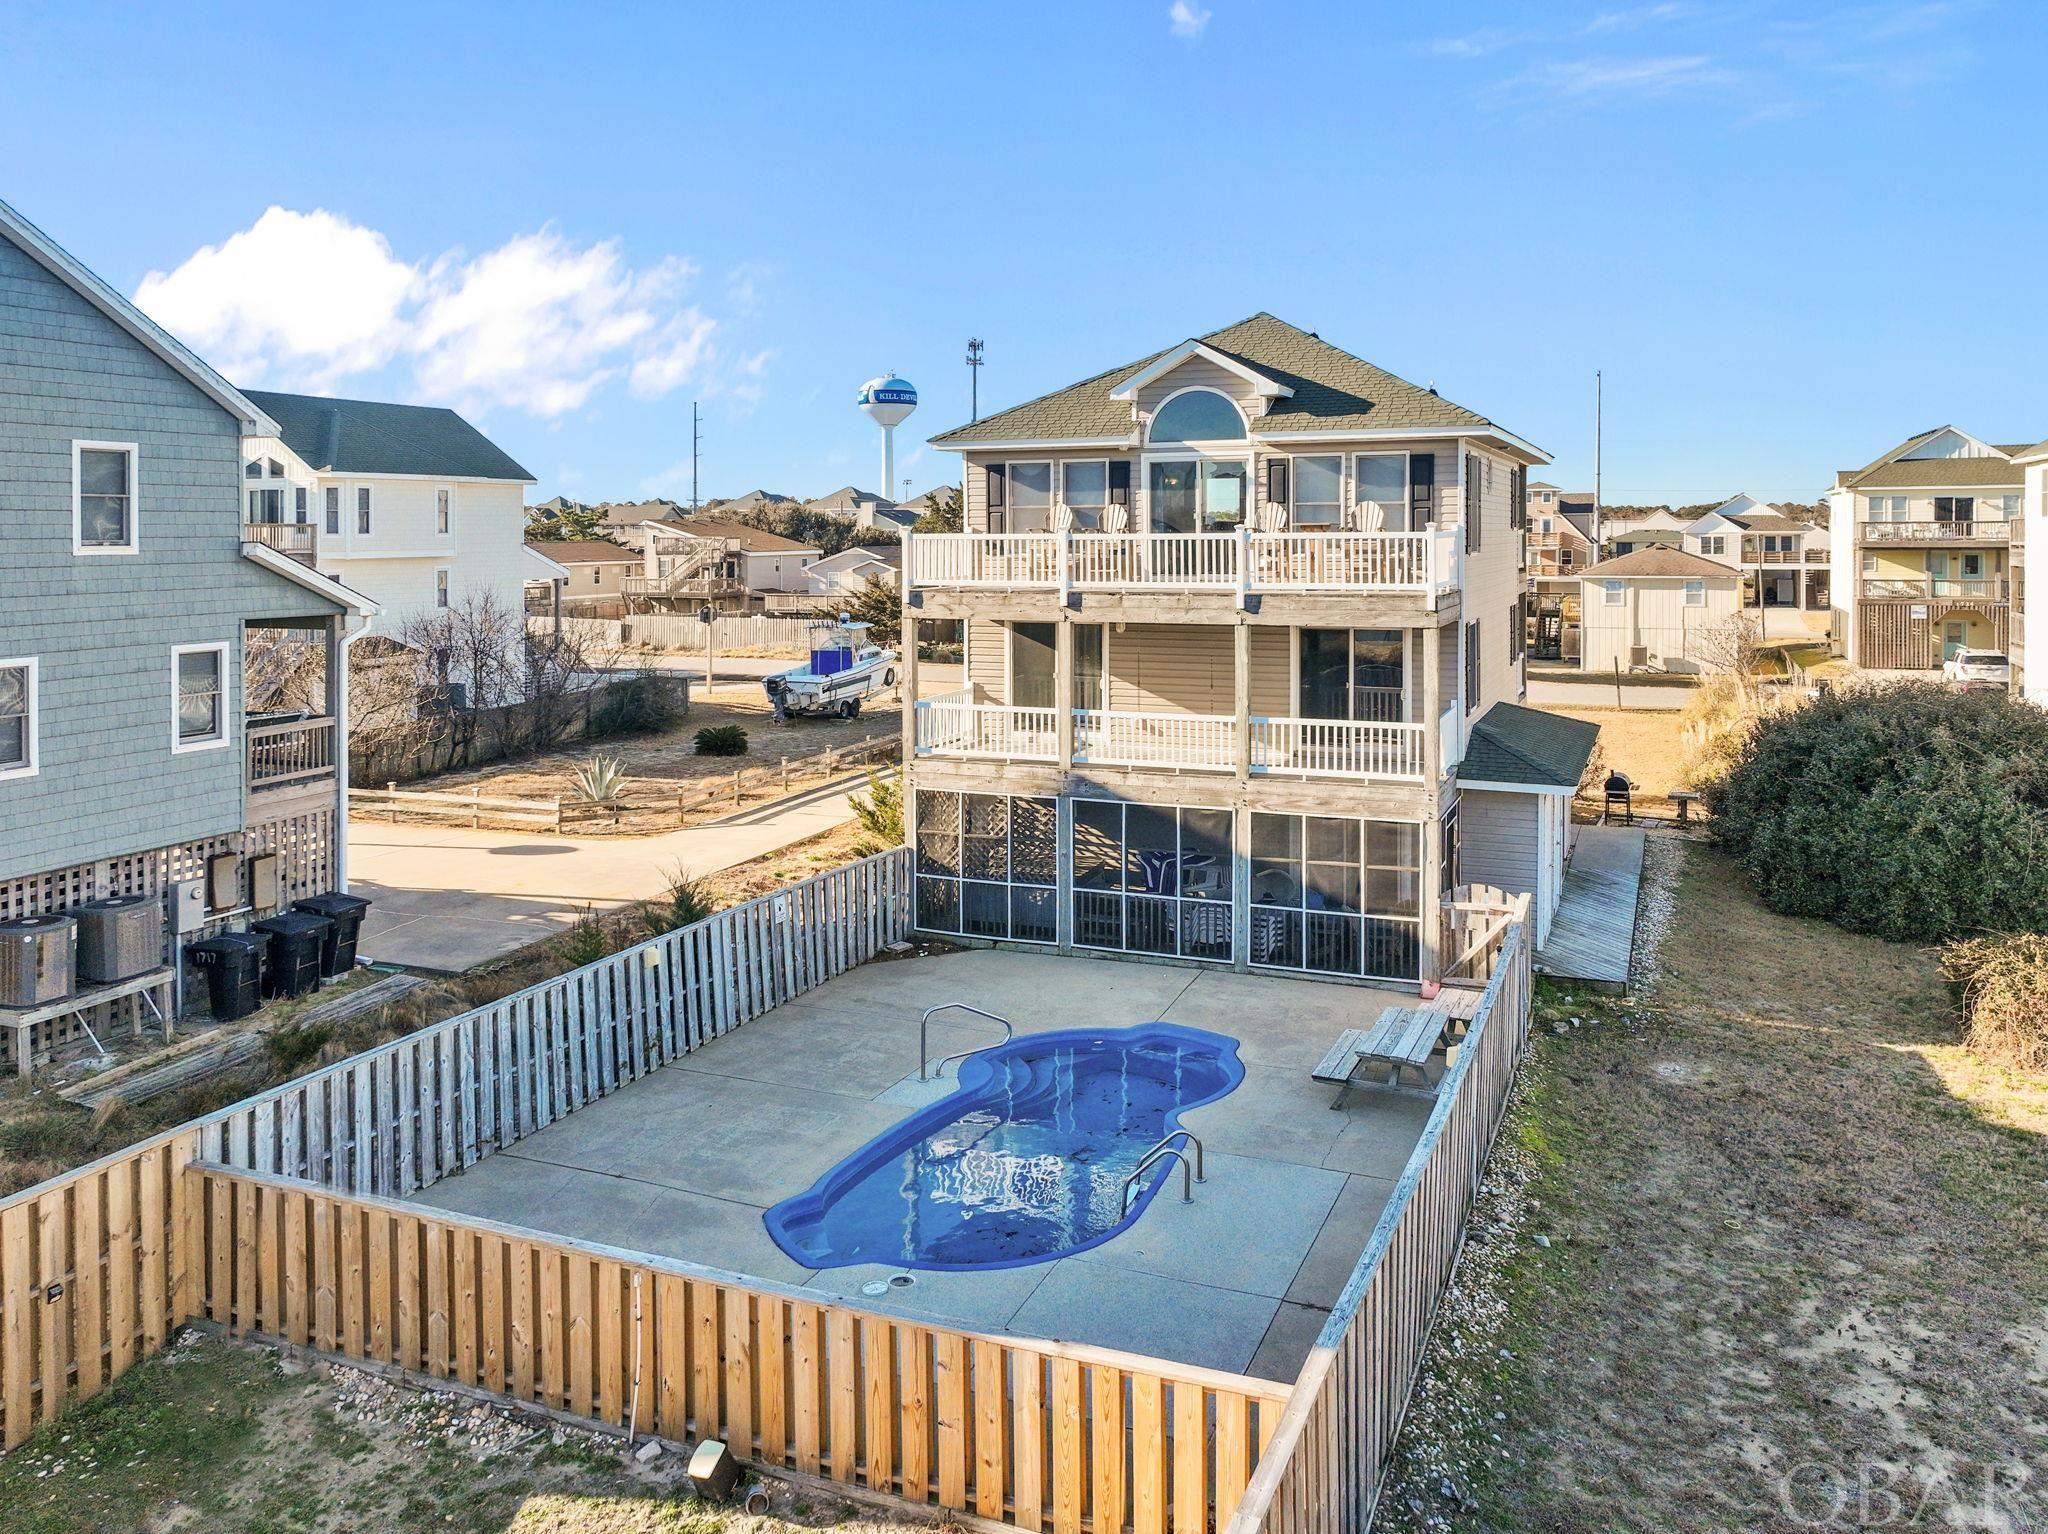 PRICE REDUCED!!! TERRIFIC LOCATION!! ONLY 2 LOTS OFF THE OCEAN!! In the heart of Kill Devil Hills, JUST MINUTES TO THE 3rd. St. OCEAN ACCESS!  This well maintained beach home has all the Bells & Whistles that make a popular rental home!  Outdoor Pool w/oversize deck area, hot tub, game room w/wet bar, large screened-in porch, multi-level decks! Huge lot (15000 sq ft) with extra space for entertaining or fun outdoor activities (volley ball, corn hole, etc.)!! The top level features a bright & open great room w/vaulted ceilings, gas fireplace, tons of windows and lovely hard wood flooring!  A powder room is also on this level. The mid level offers 3 nice size bedrooms and two full baths also w/hard wood flooring.  The east and west side rooms have access to decks.  The ground level features two bedrooms, a full bath, laundry area, and the game room which opens up to the screened porch overlooking the pool area! NEW in 2022- Laminate flooring, top floor freshly painted, New stove, pool pump, solar lighting for outdoors, water heater. NEW 2021- Pool converted to saltwater, new toilets, water filtrations for kitchen sink, new fence, bunk beds, king, lazyboy sectional. Nearby restaurants, shops, movie theaters, fun activities!  Ocean Views, consistent rental income!  This is a must see!